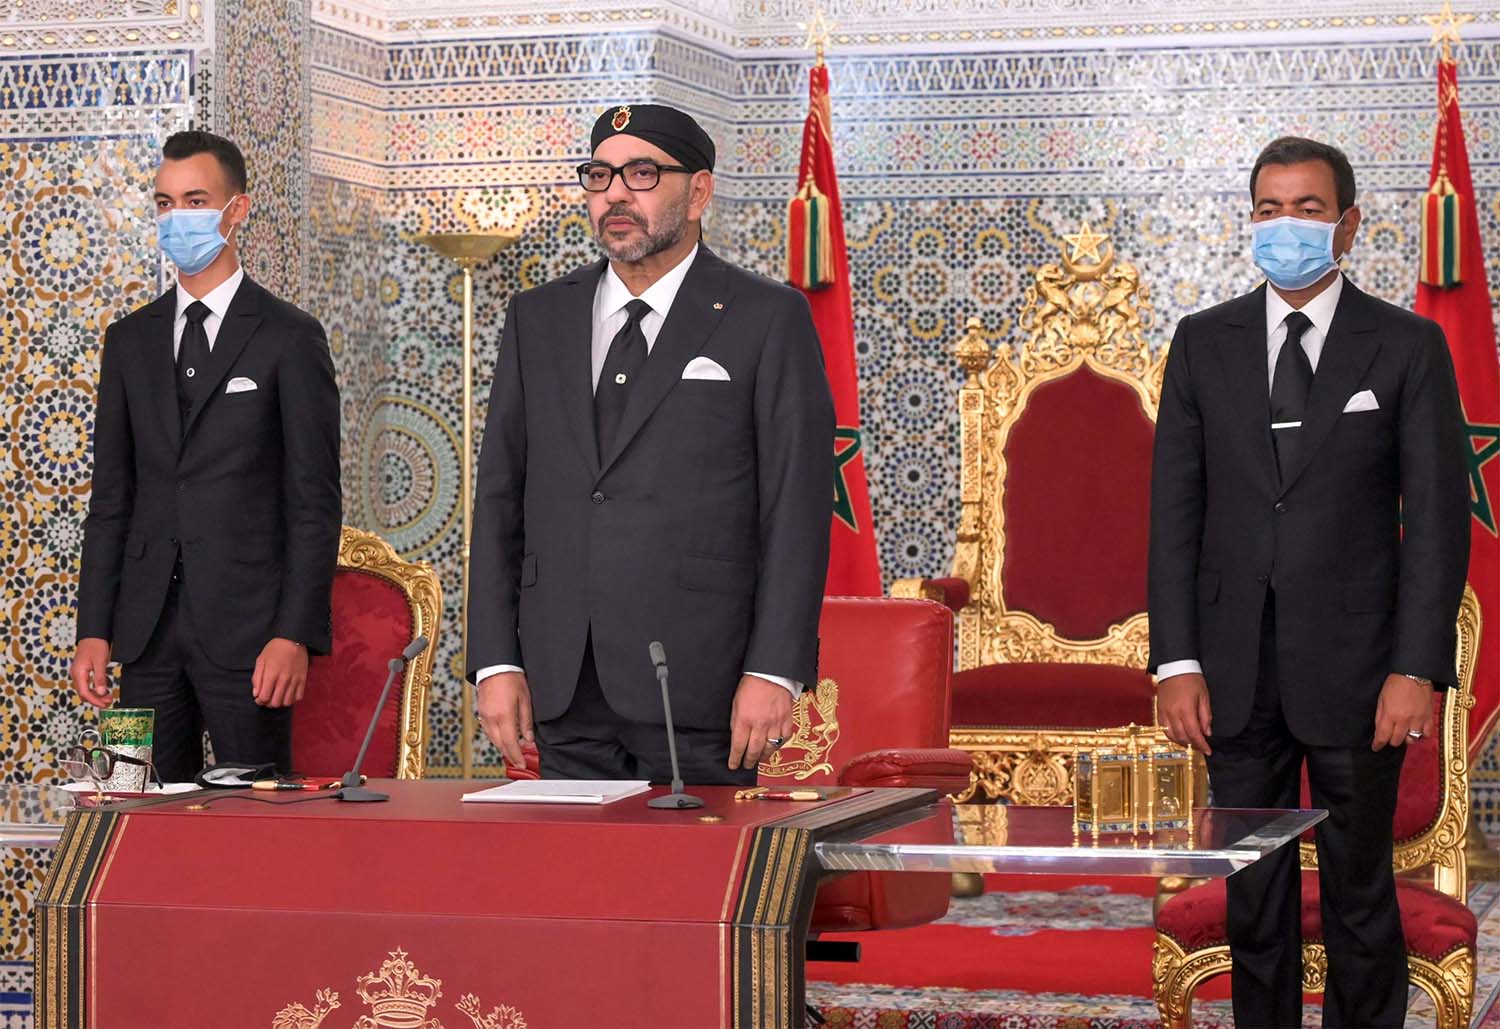 King Mohammed VI put the socio-economic reforms at the forefront of his throne speech